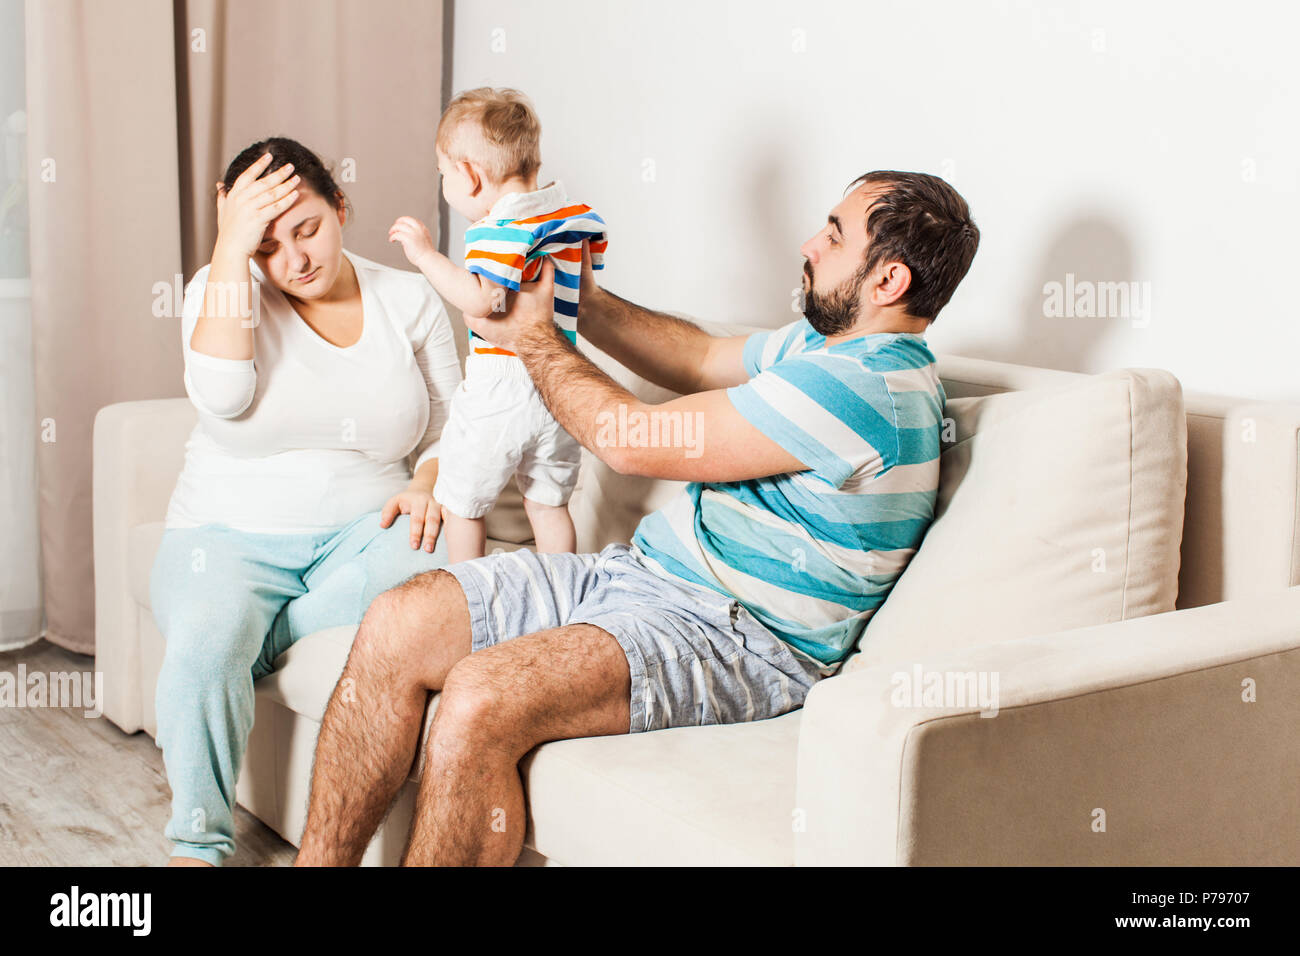 A man and a woman with a small child are sitting on the sofa in the room. Stock Photo